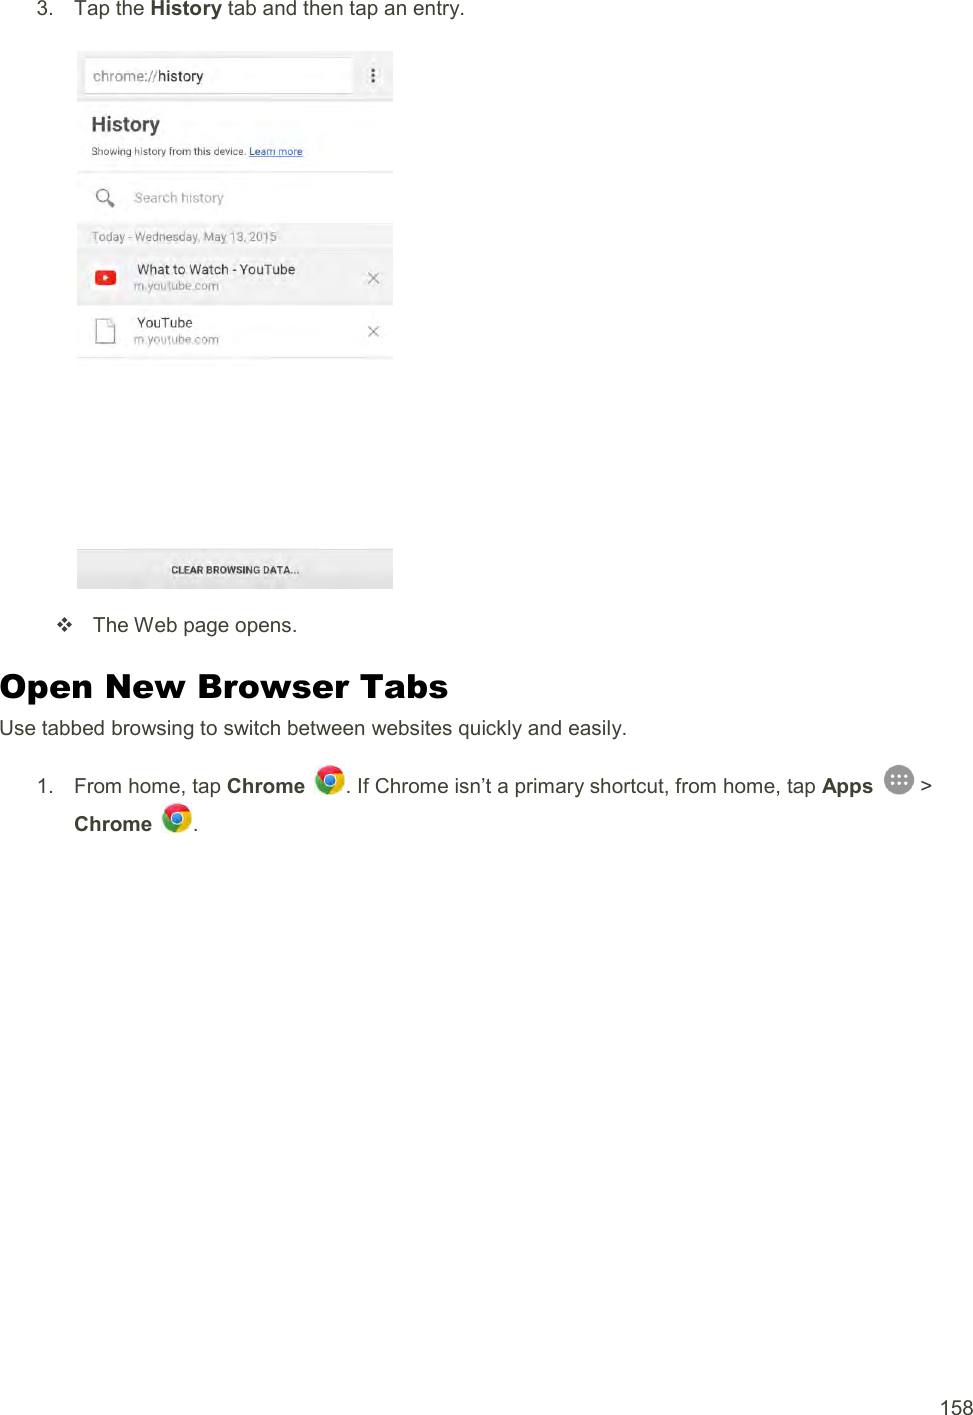  158 3.  Tap the History tab and then tap an entry.     The Web page opens. Open New Browser Tabs Use tabbed browsing to switch between websites quickly and easily. 1.  From home, tap Chrome  . If Chrome isn’t a primary shortcut, from home, tap Apps   &gt; Chrome  . 